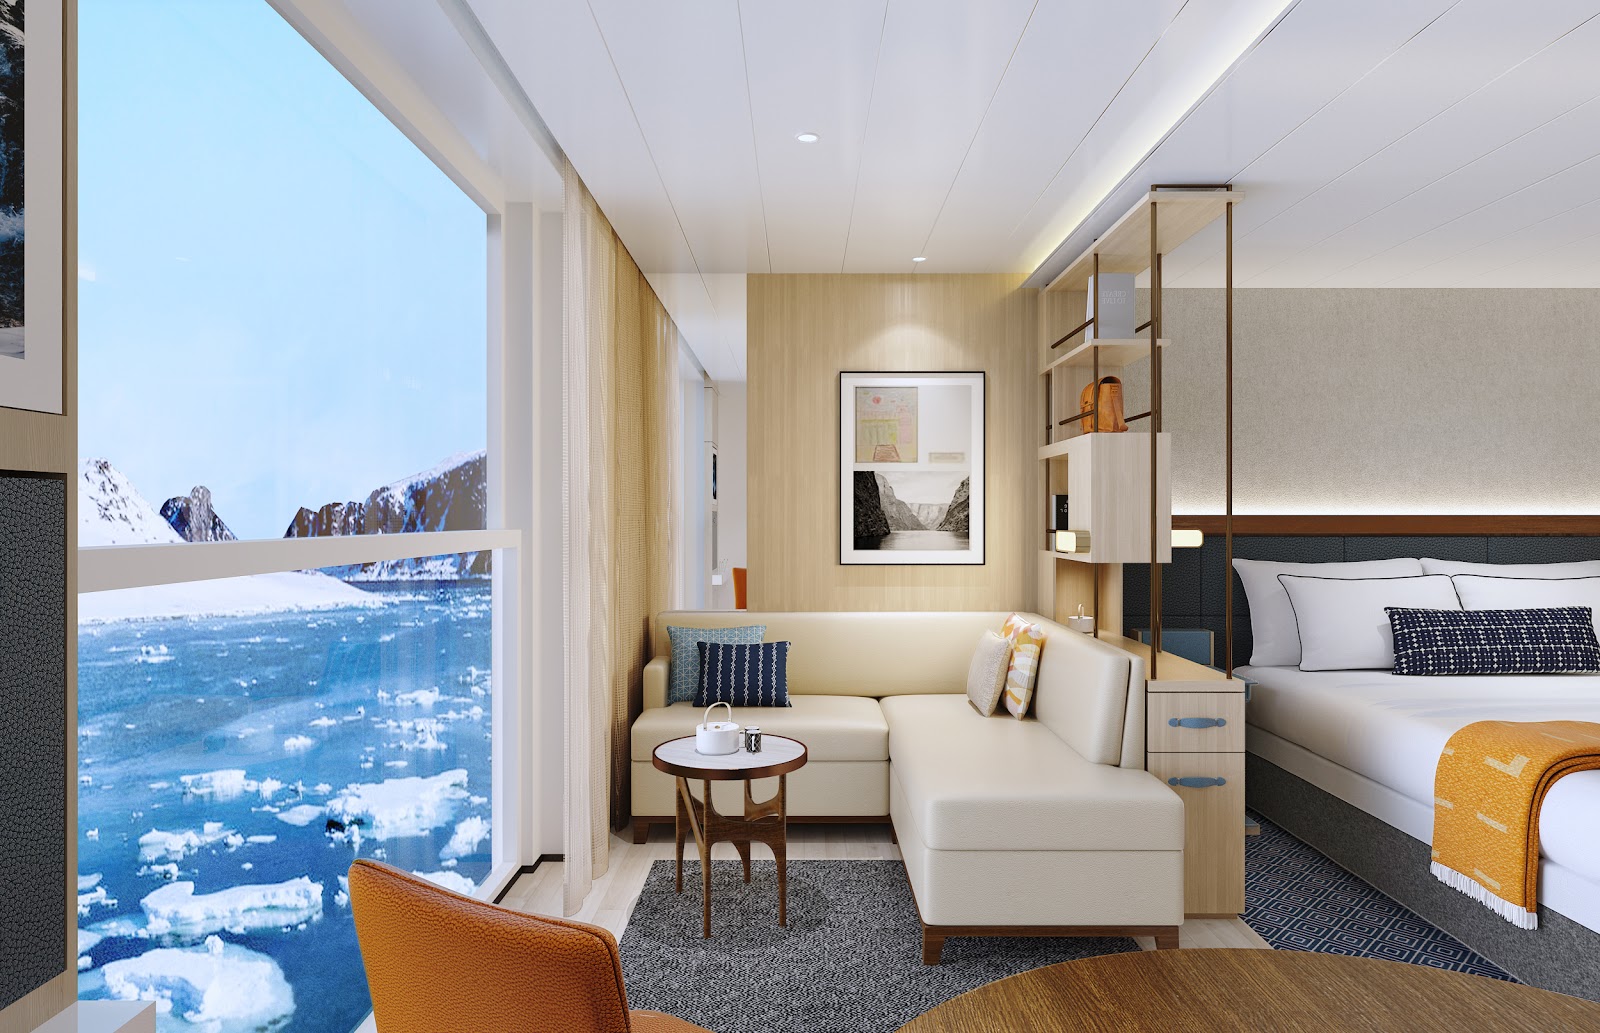 All staterooms on board Viking Octantis and Viking Polaris will feature a Nordic Balcony, a sunroom that converts into an al fresco viewing platform.